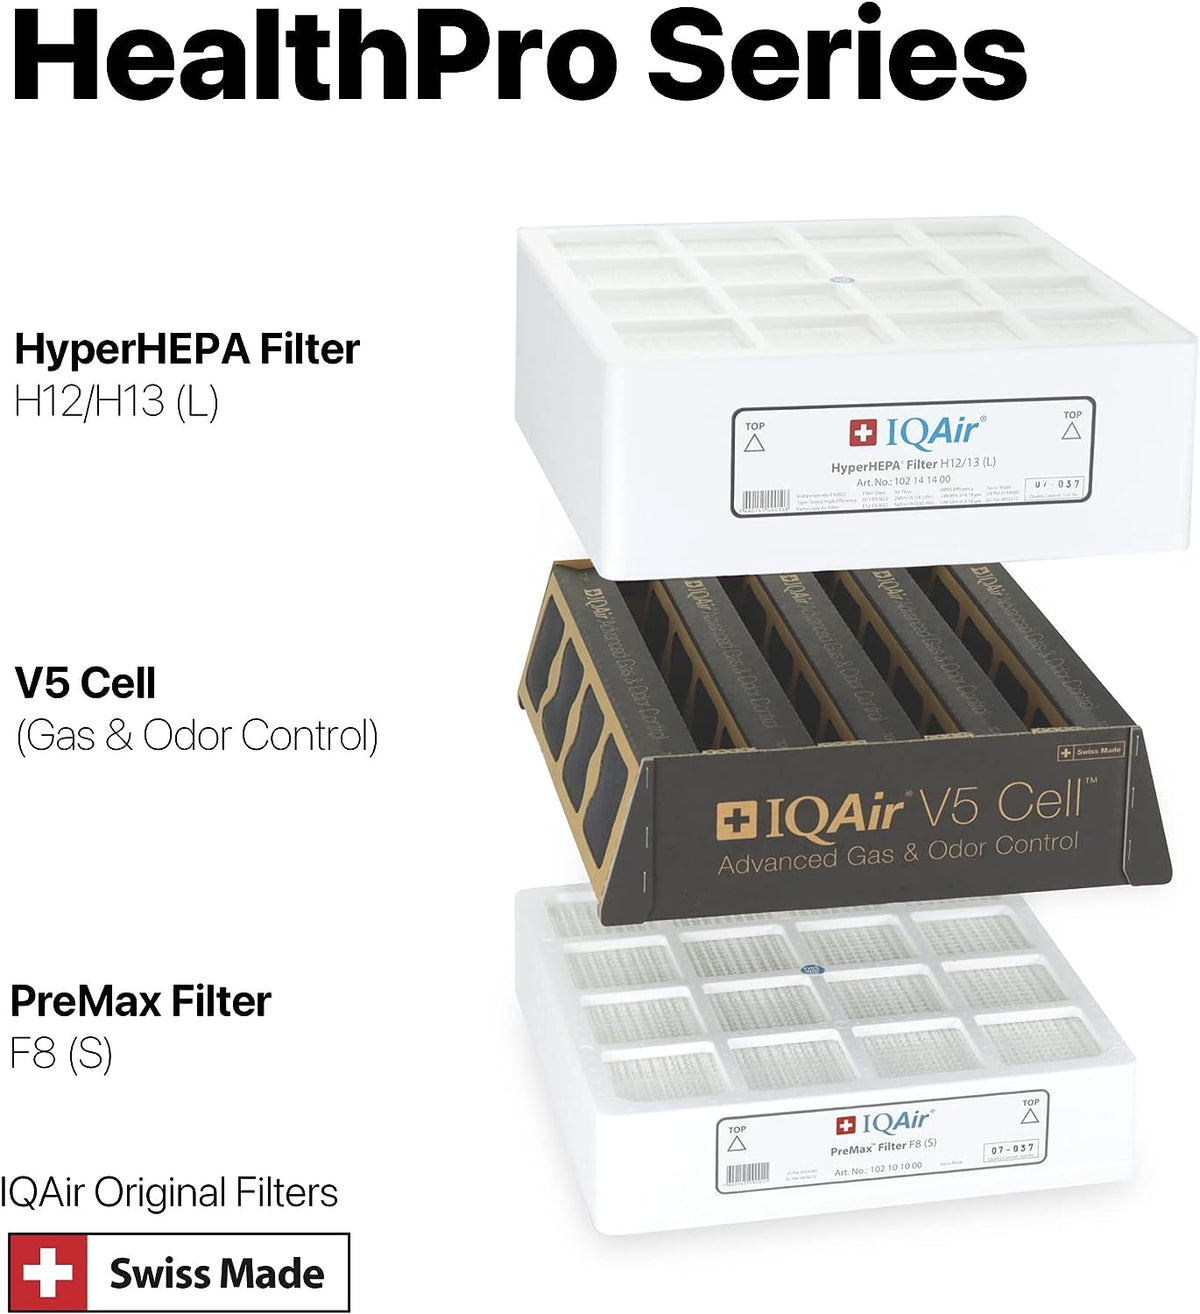 HealthPro Series filters stacked on eachother